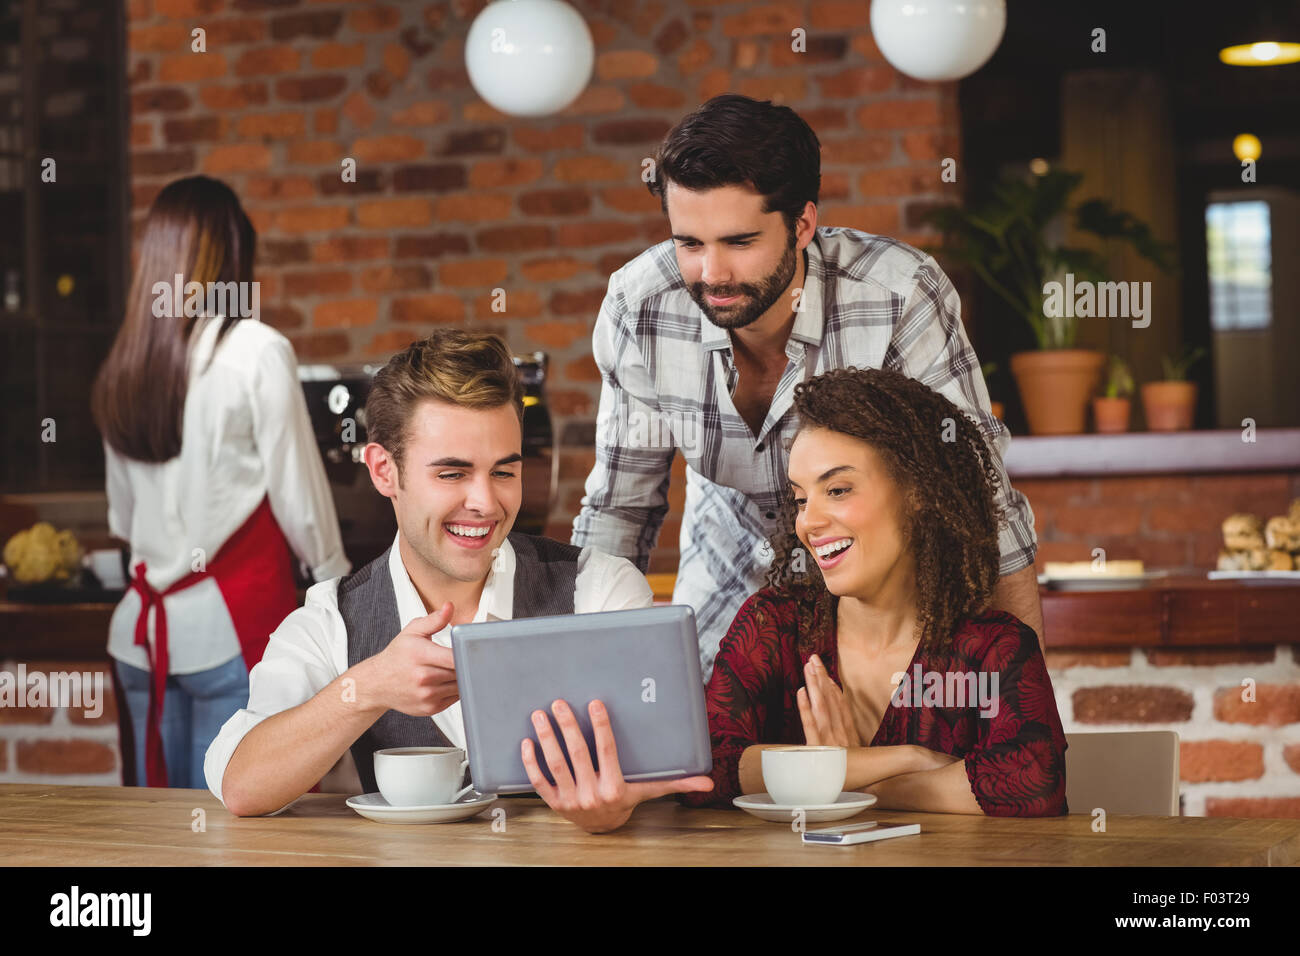 Smiling friends looking at digital tablet Stock Photo